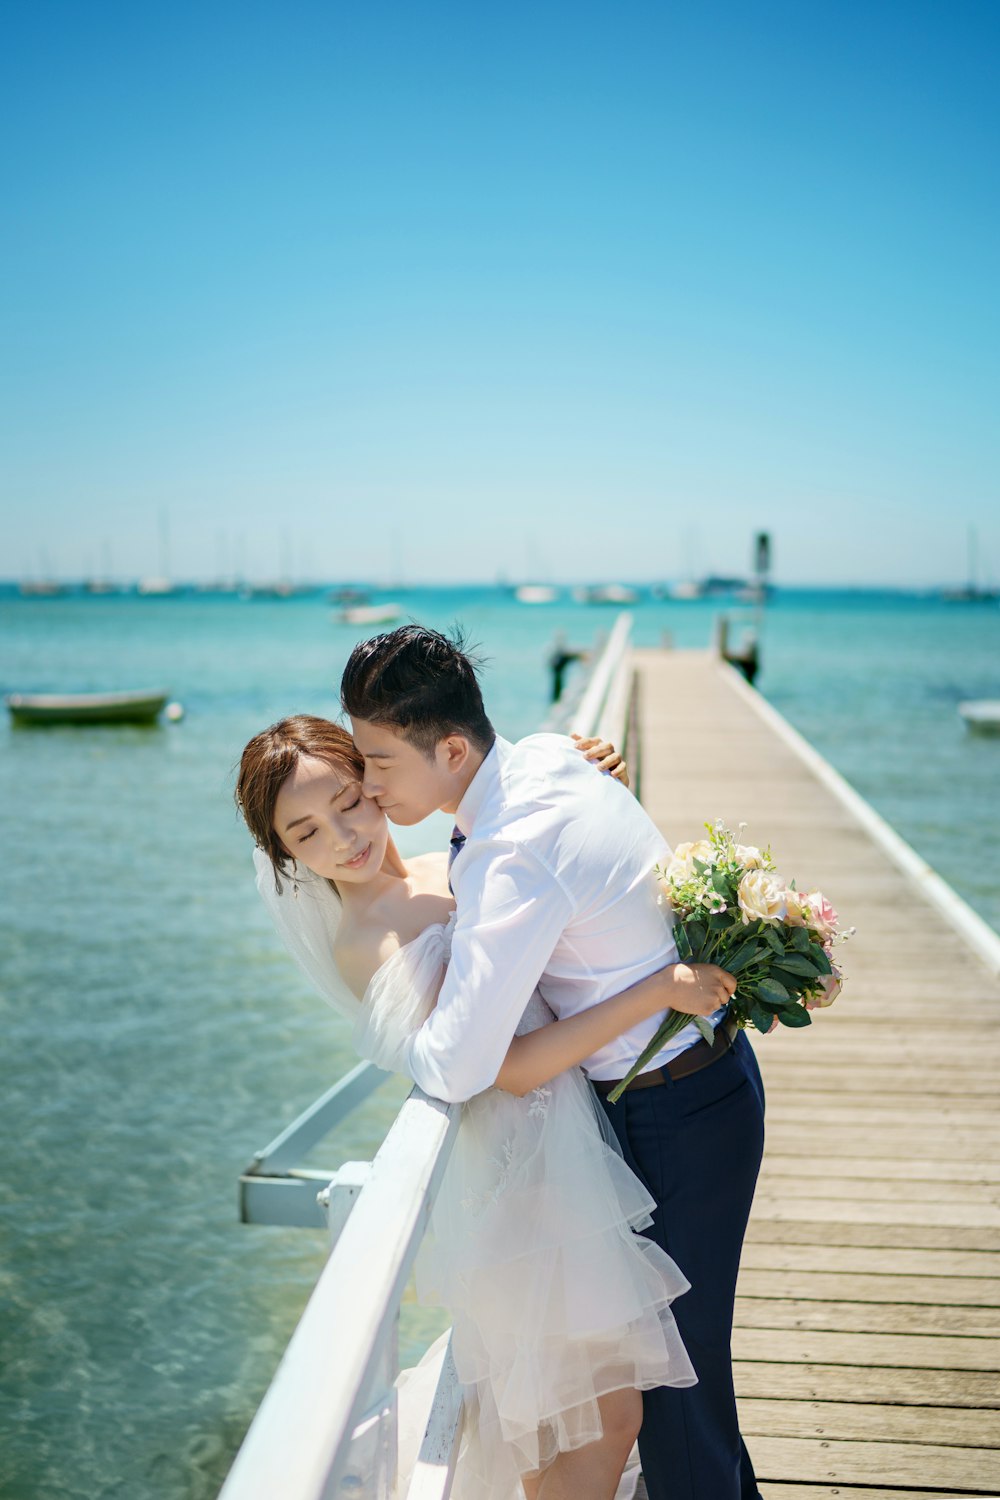 a bride and groom embracing on a pier